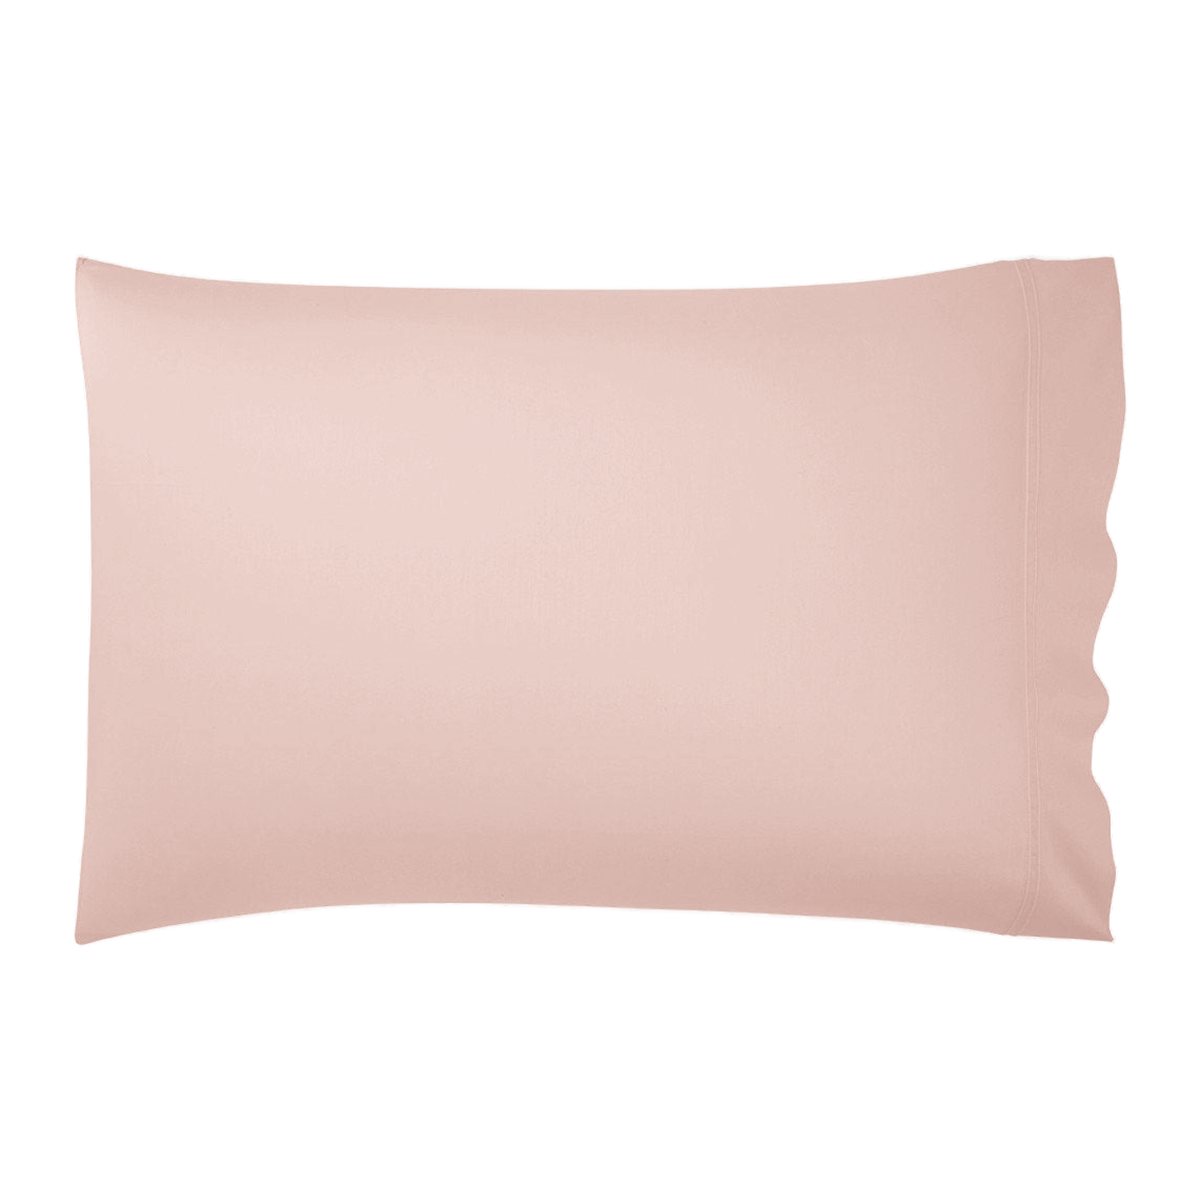 Pillow of Yves Delorme Triomphe Bedding in Poudre Color